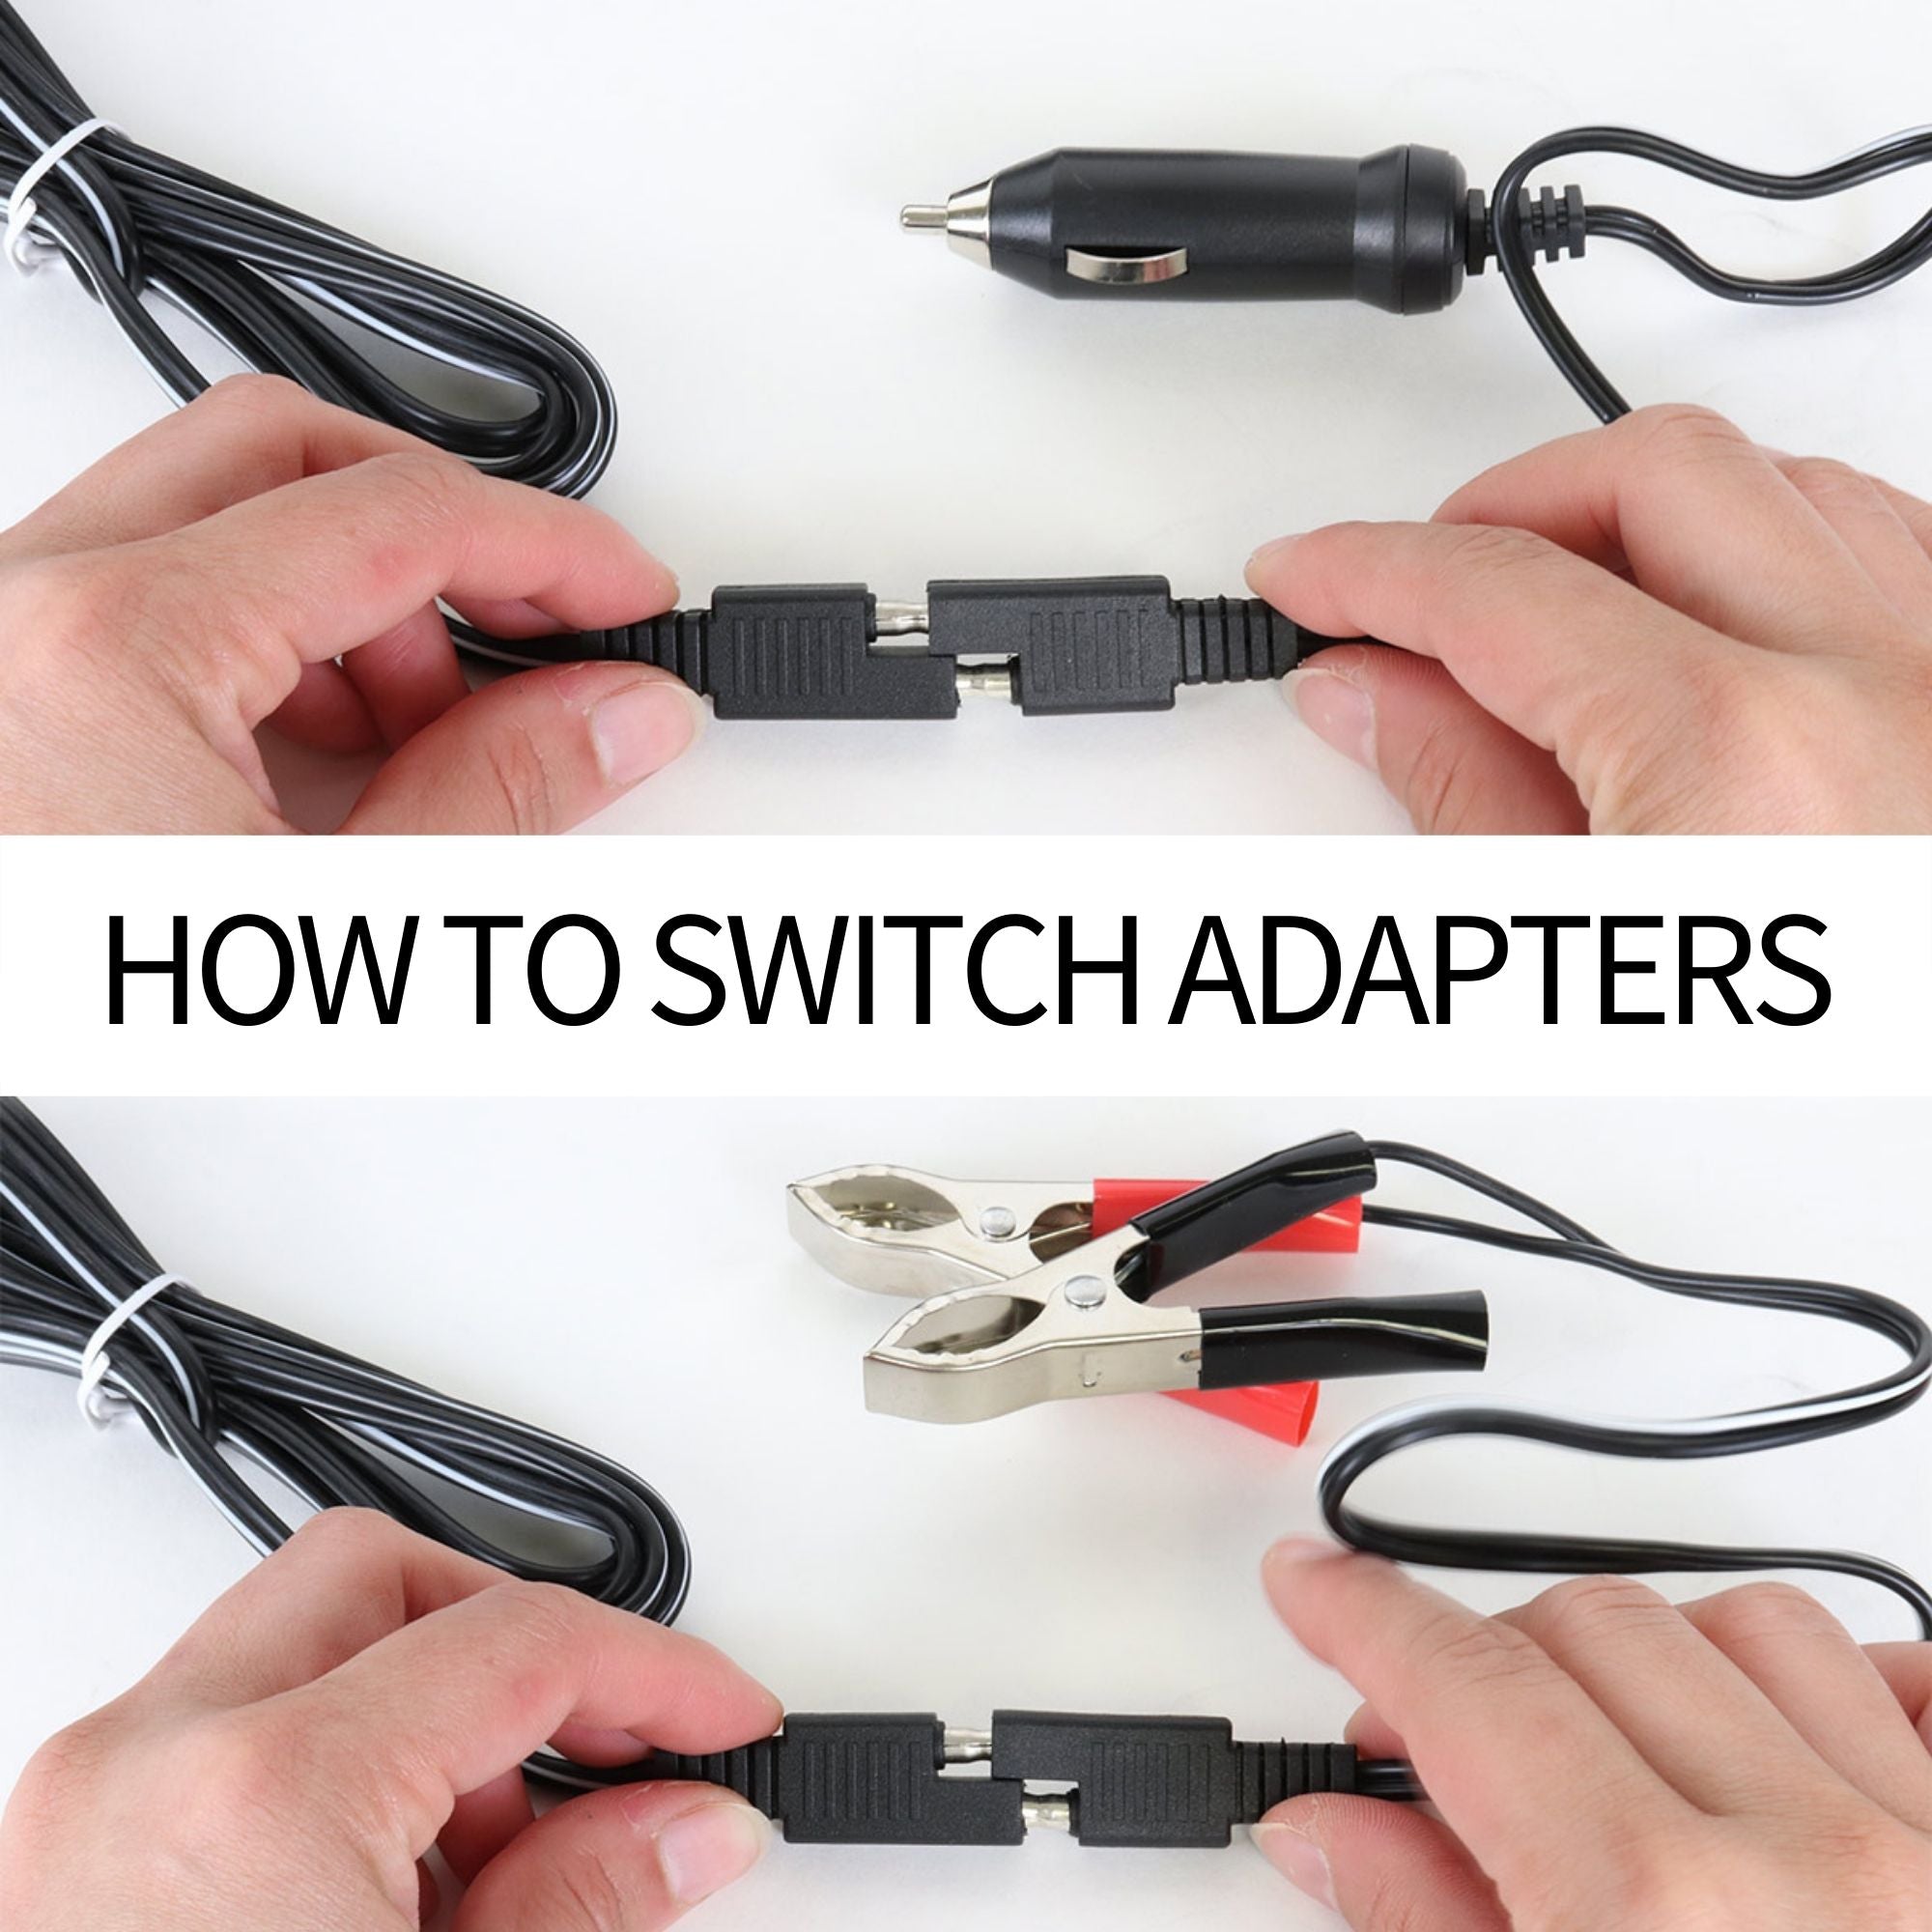 Top image shows a person's hands plugging the 12V DC adapter into the J-plug and bottom image shows a person's hands plugging the battery clamp adapter into the J-plug; text in the middle reads, "How to switch adapters"